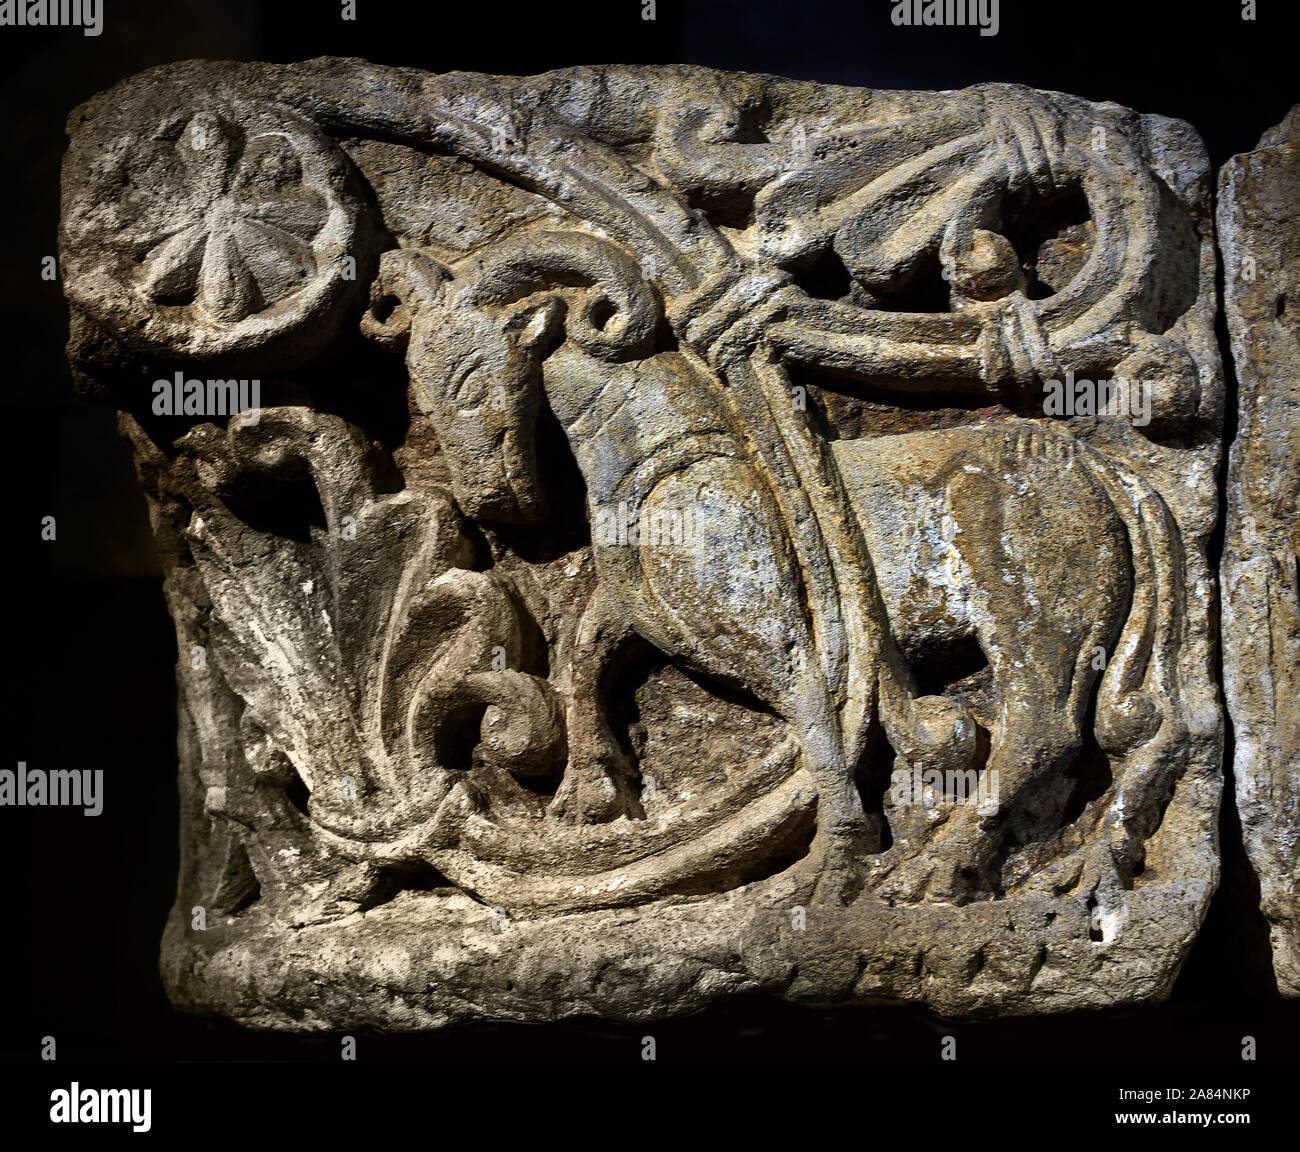 Capital , Gemini, Capricorn, Aries on the first complete block, Taurus and Pisces on the second block (fragmentary), Abbey church of Sainte-Geneviève in Paris 1100 AD Cluny Museum - National Museum of the Middle Ages, Paris, France, French. Stock Photo